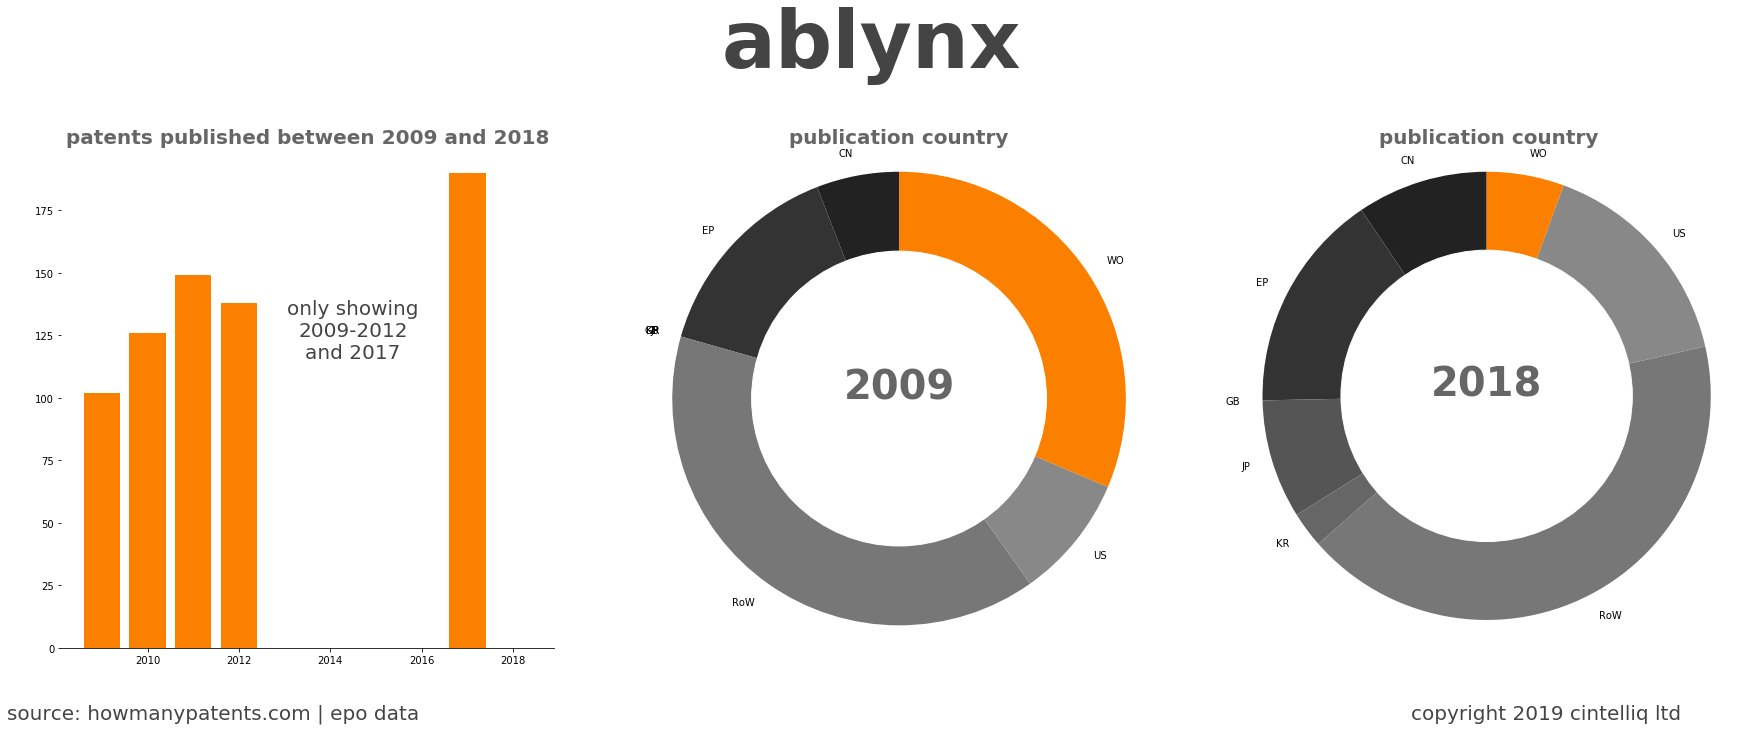 summary of patents for Ablynx